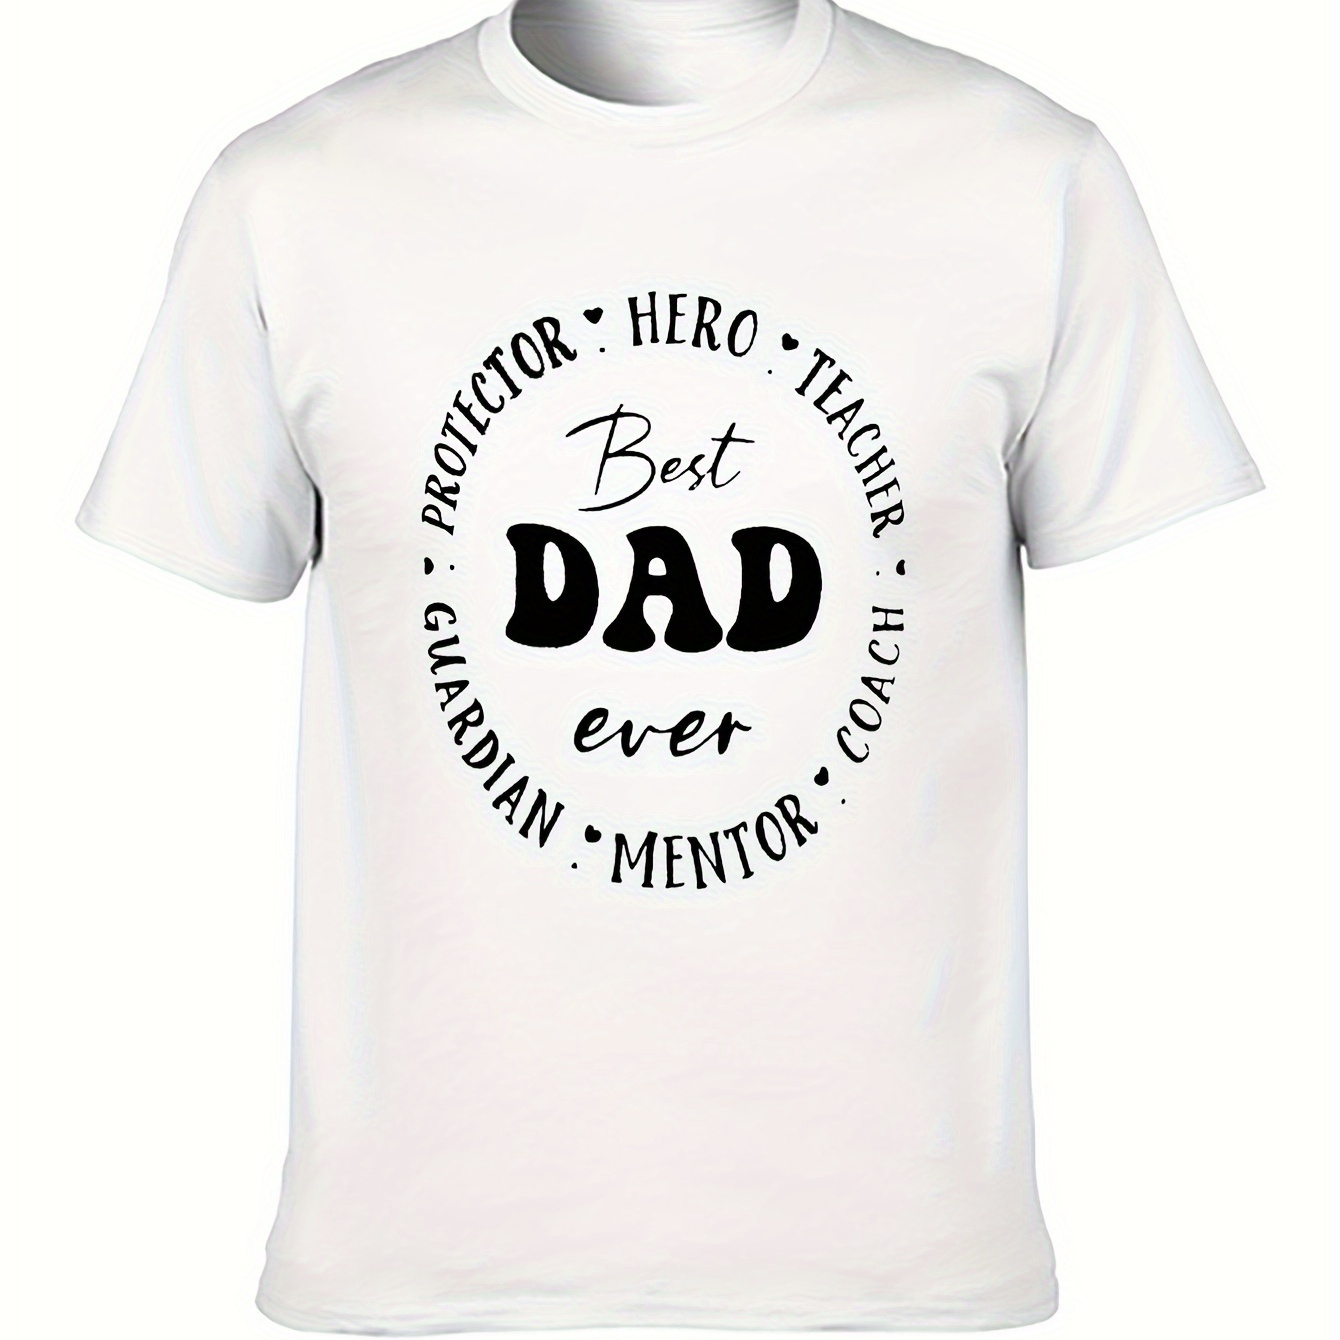 

Father's Day, Special Gift, I Love You Dad, Graphic Tees Soft Cotton Crew Neck Short Sleeve T-shirt Funny Novelty